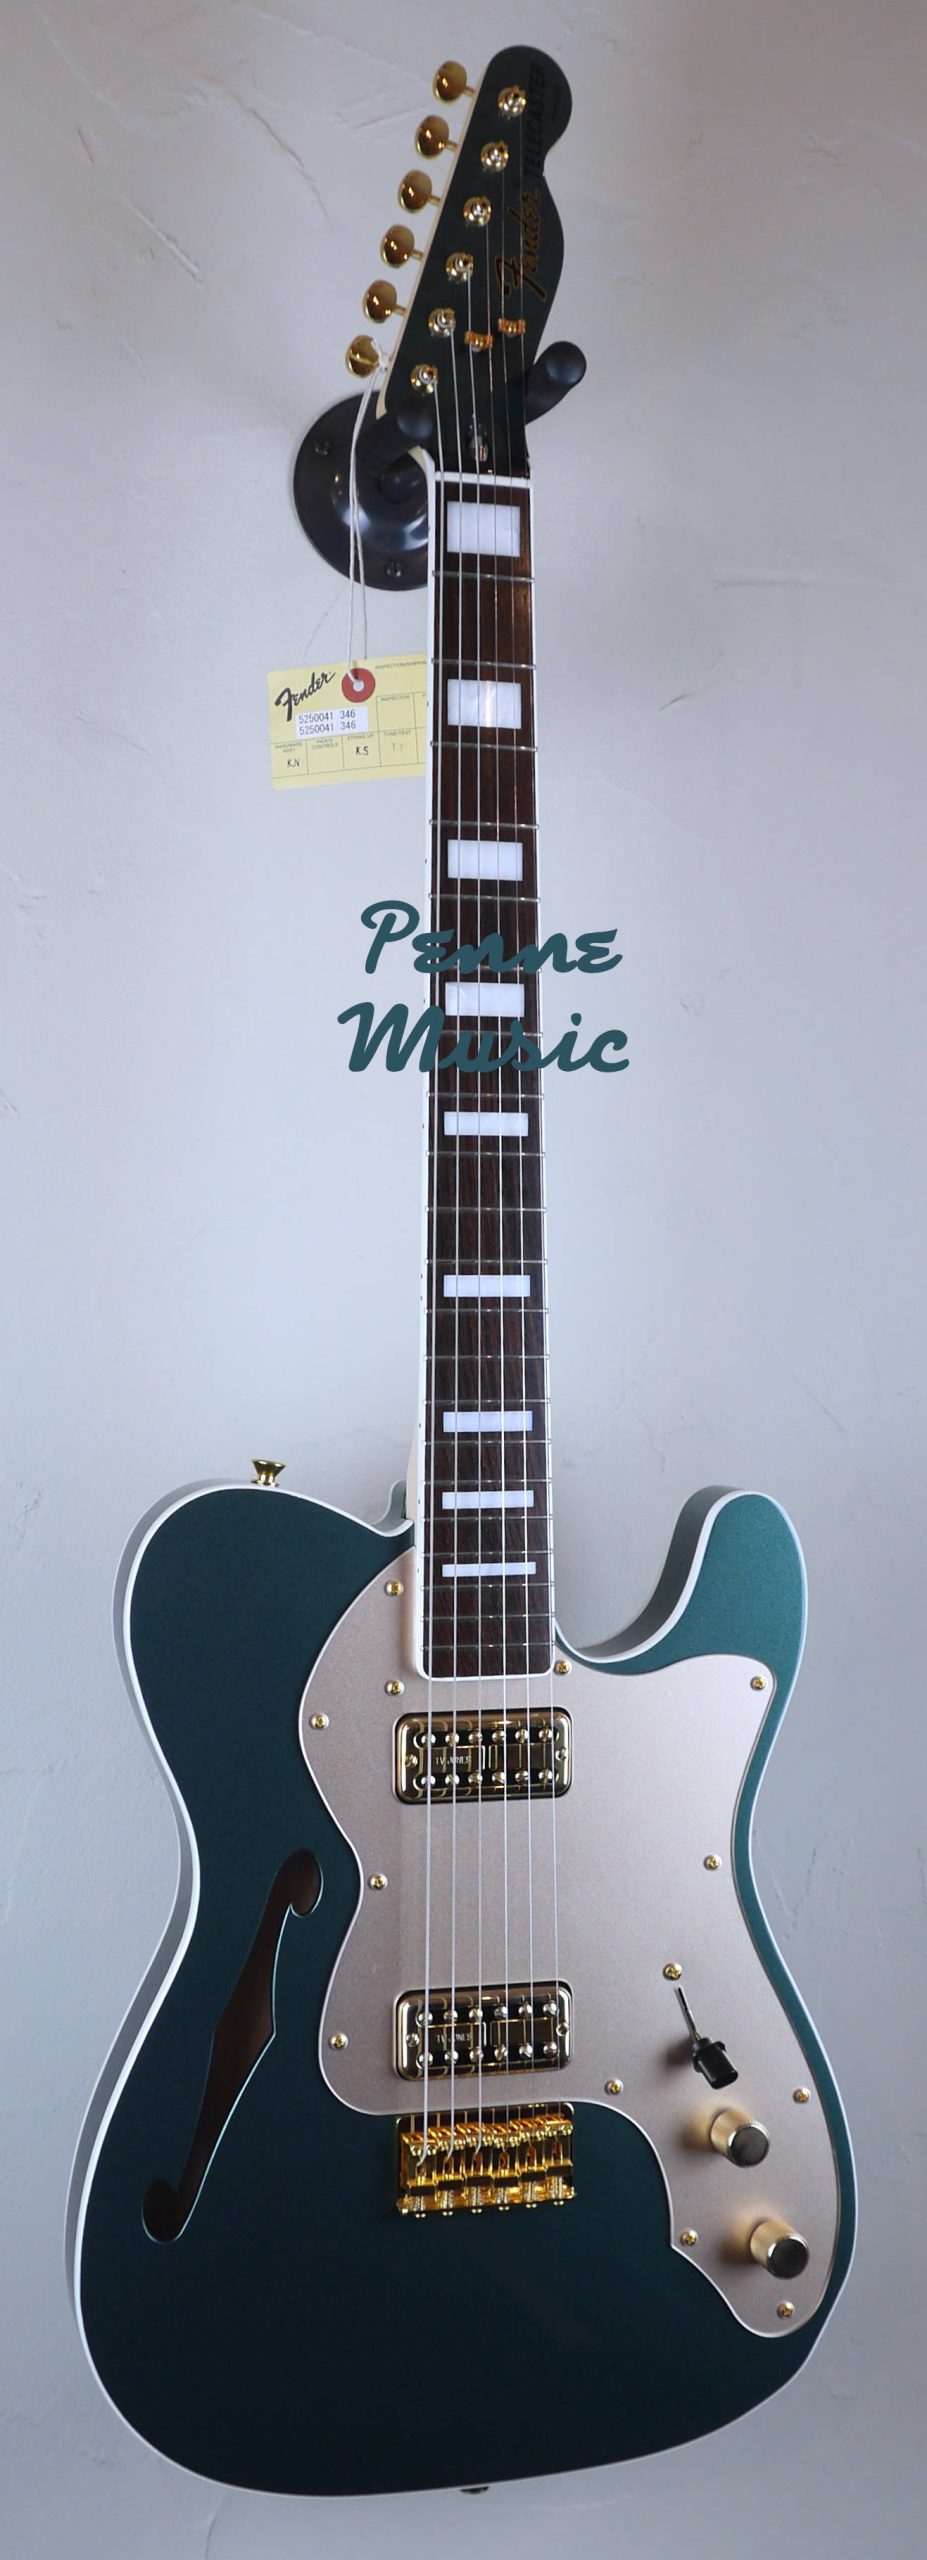 Fender Limited Edition Super Deluxe Thinline Telecaster Sherwood Green Metallic 1